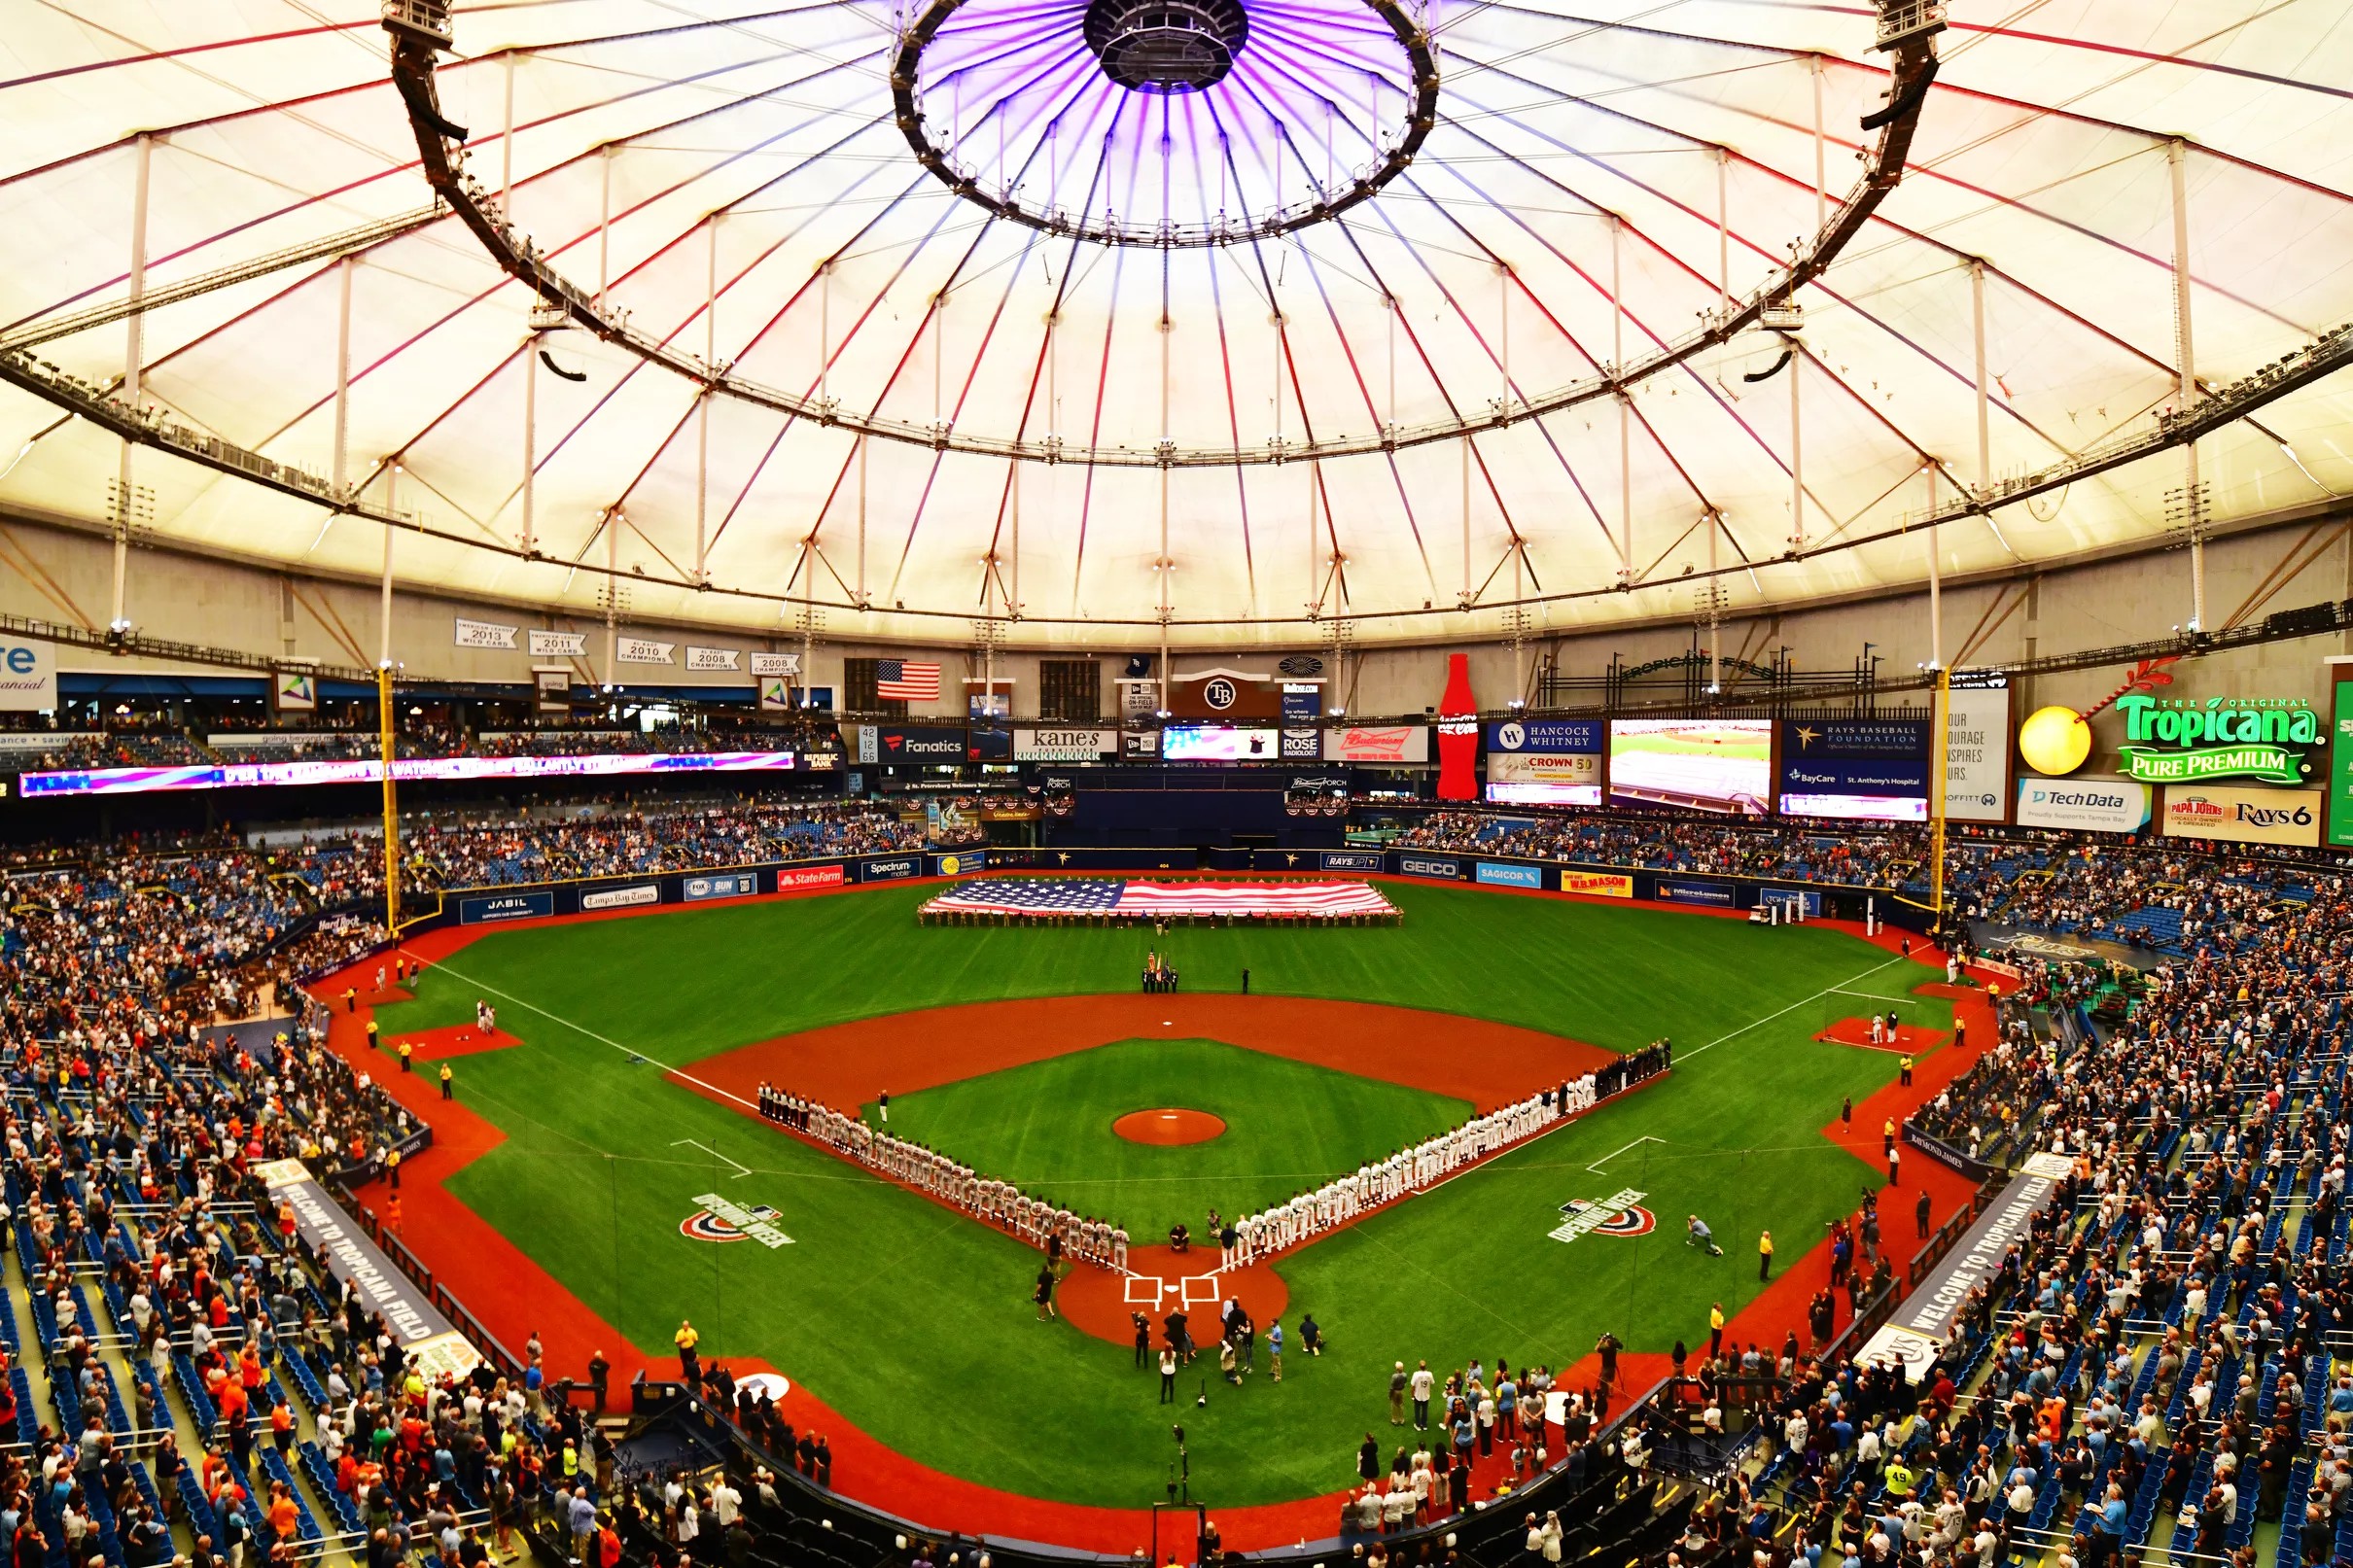 What the Rays might teach us about attendance